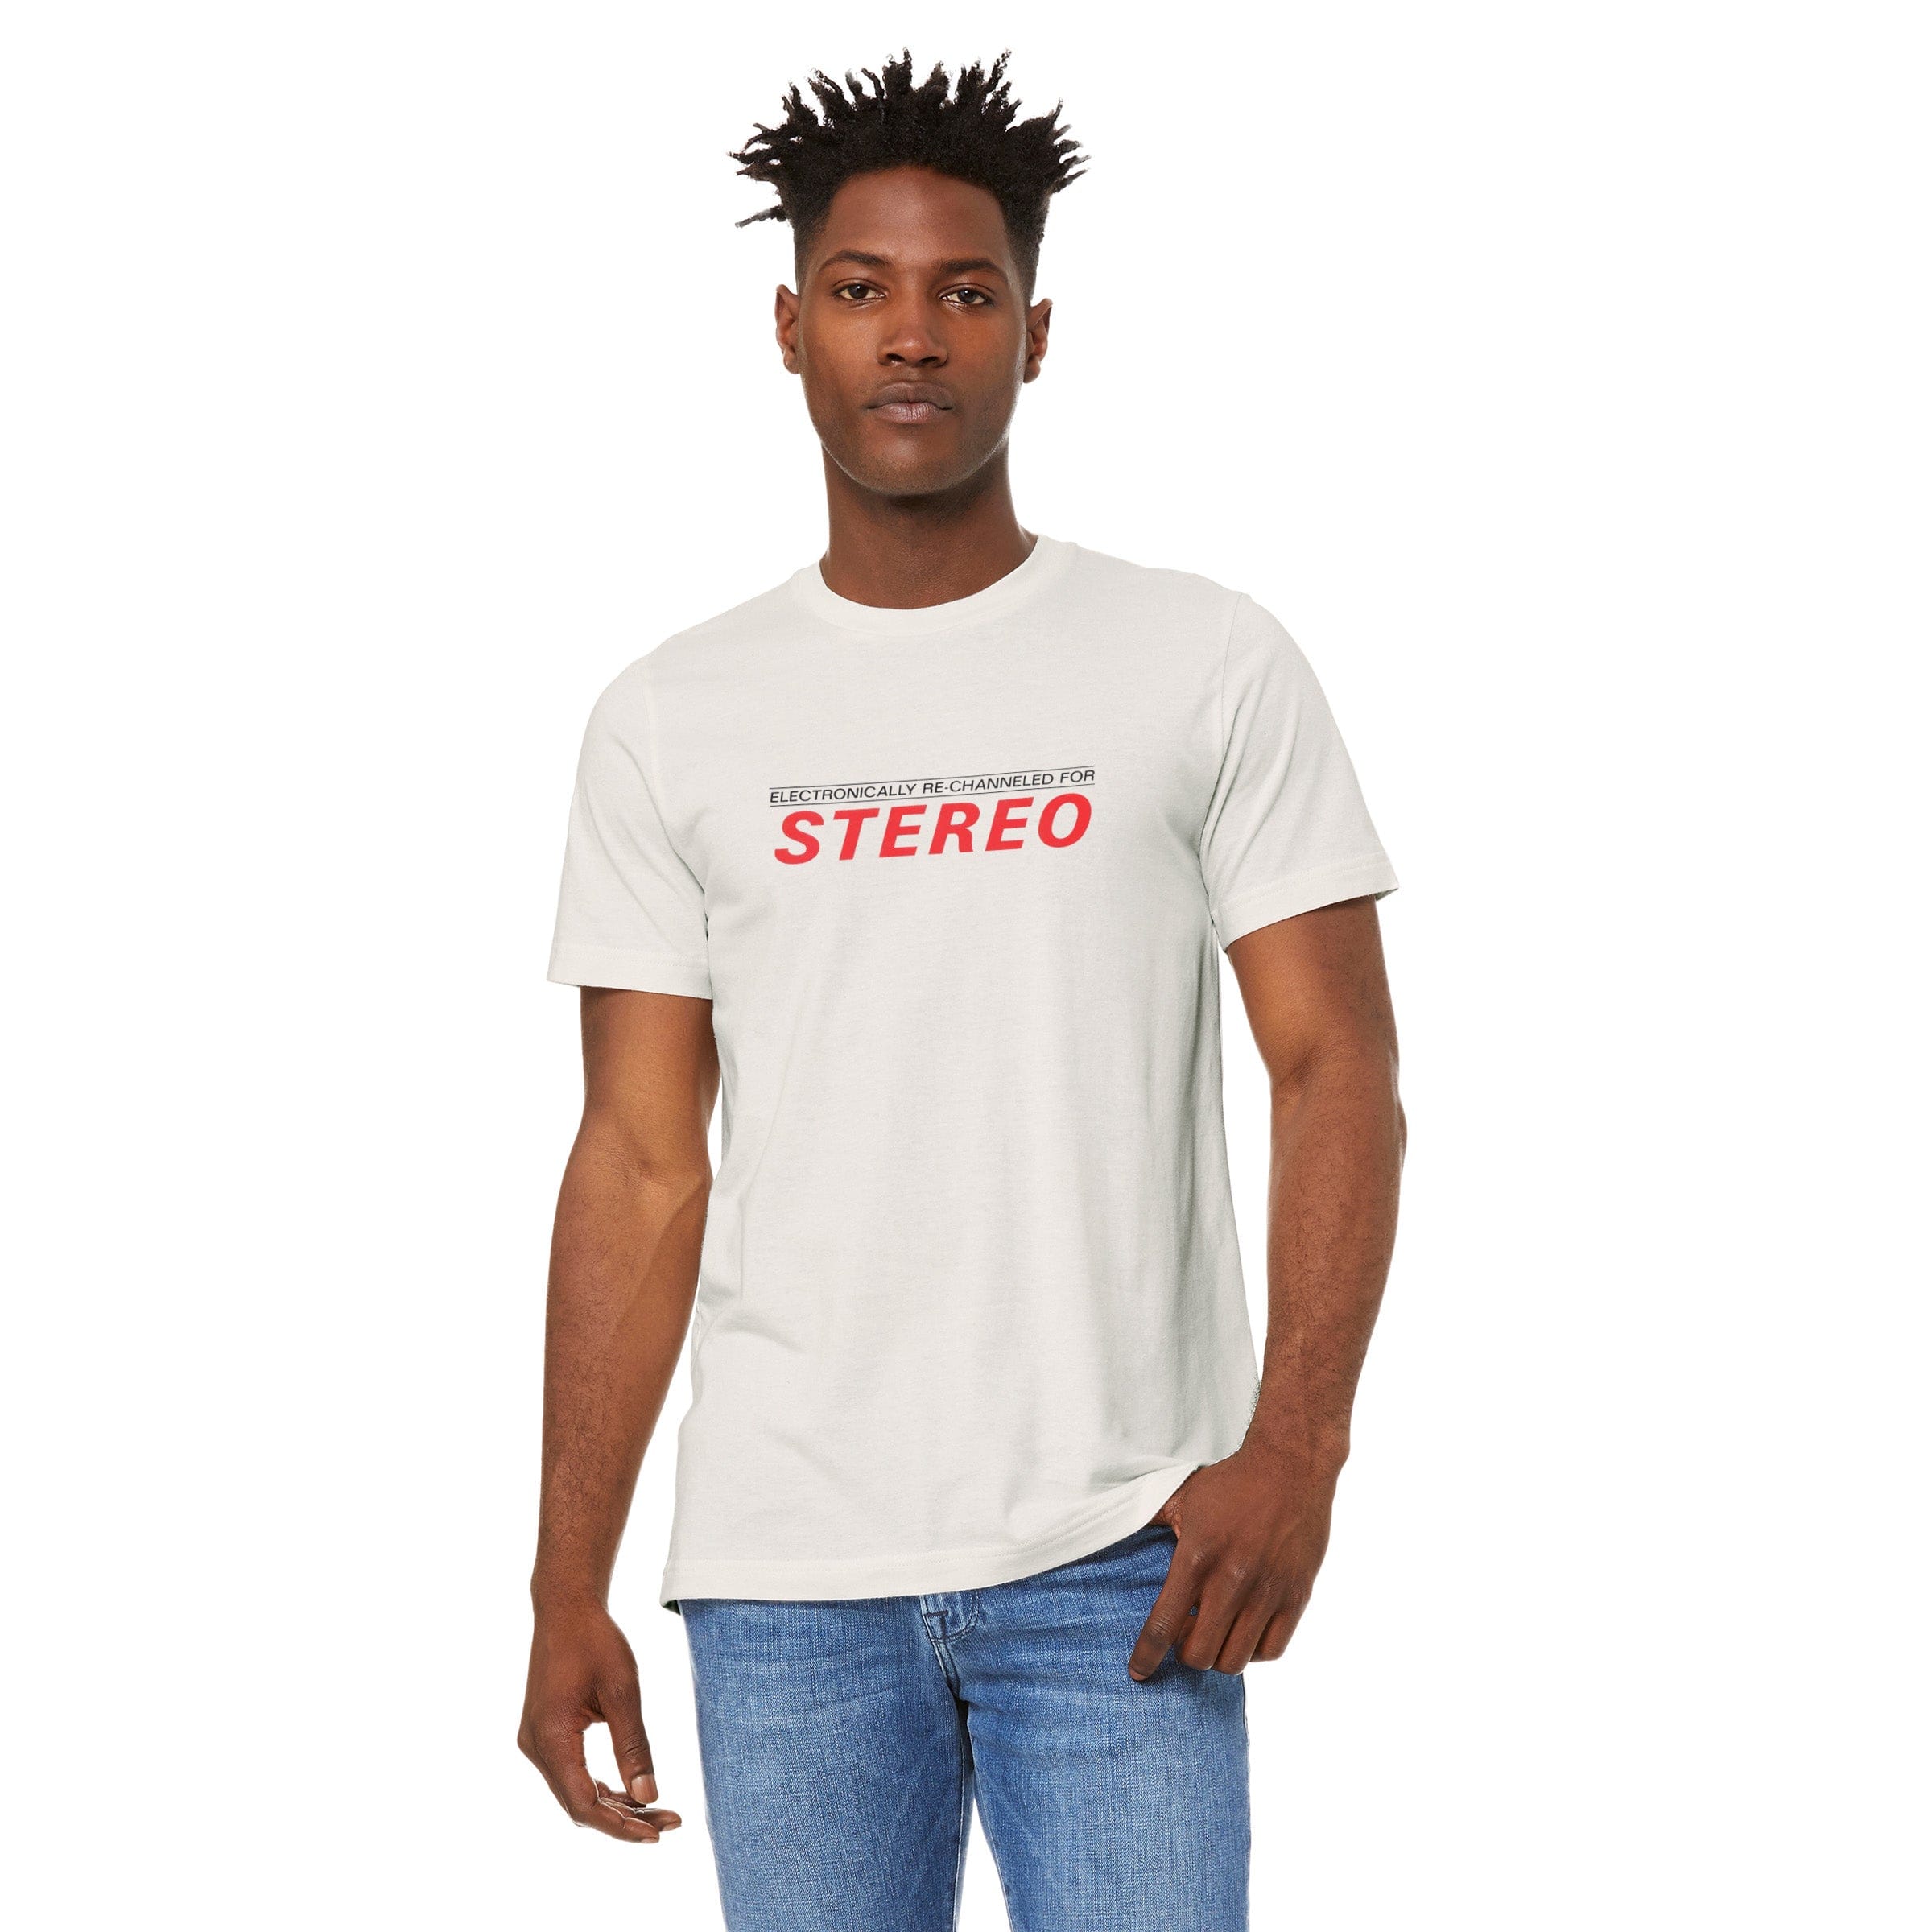 Stereo: Re-channeled T-Shirt